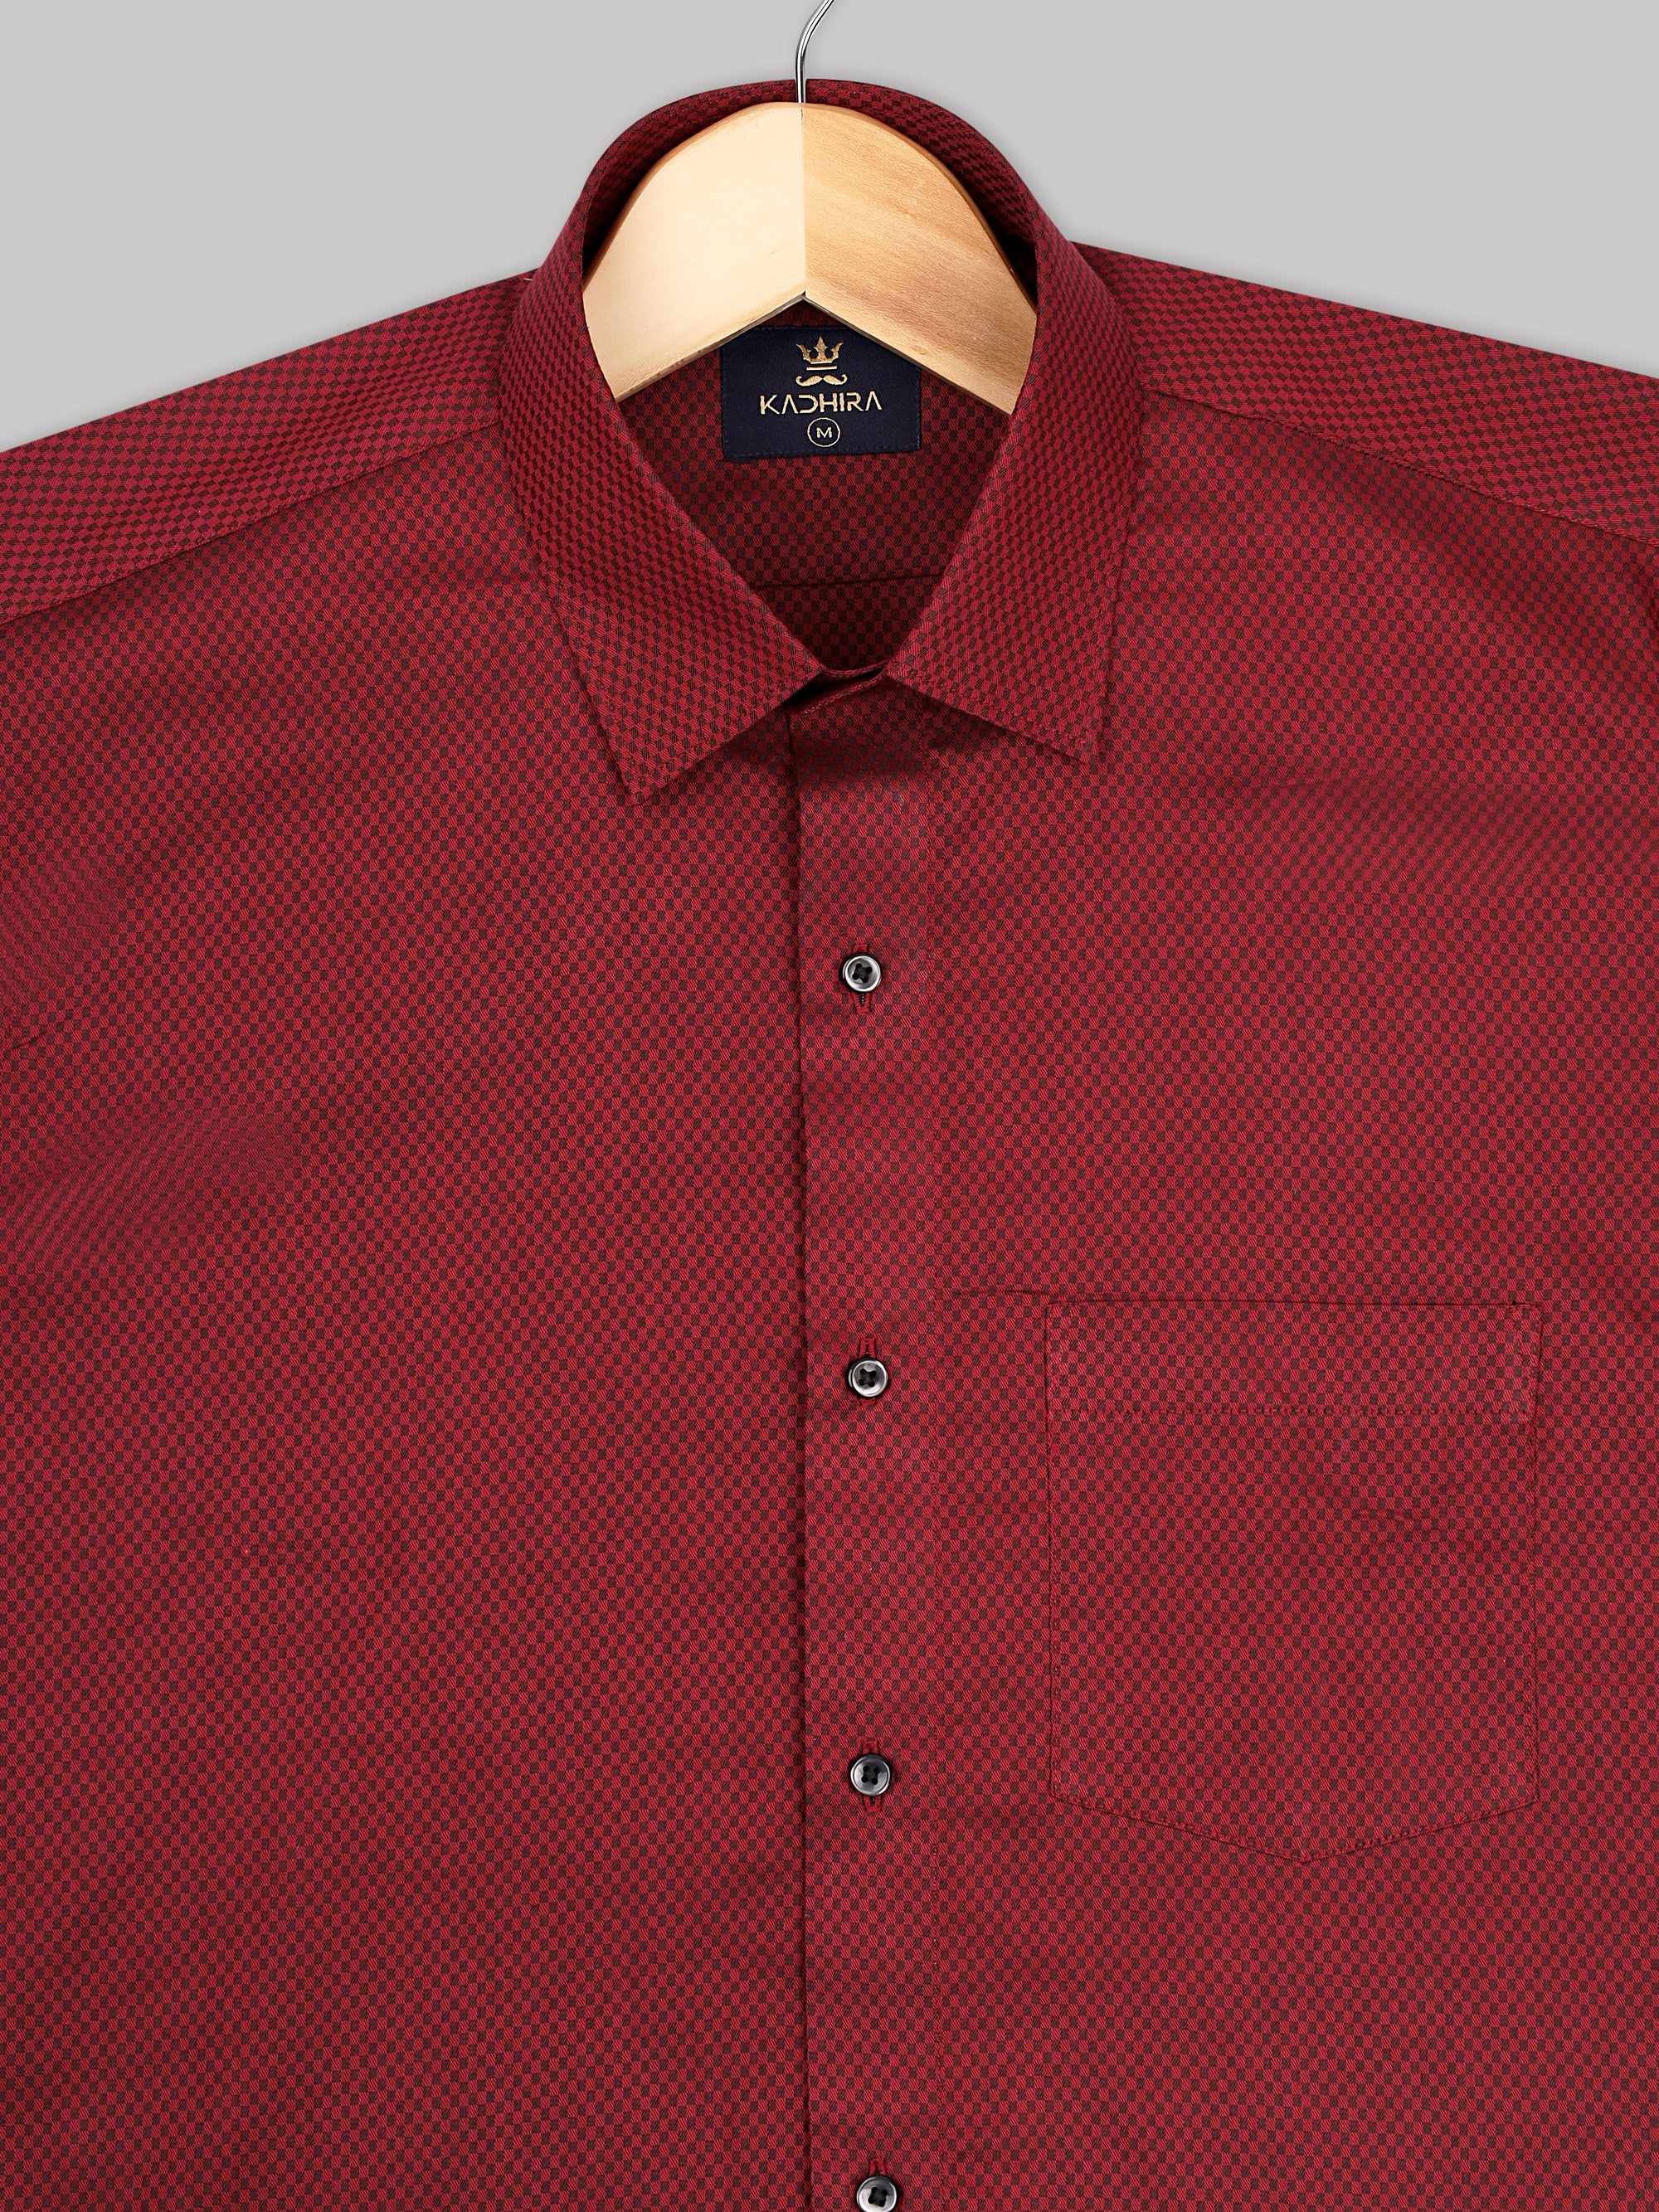 Angels Red Dobby Textured Jacquard Cotton Shirt